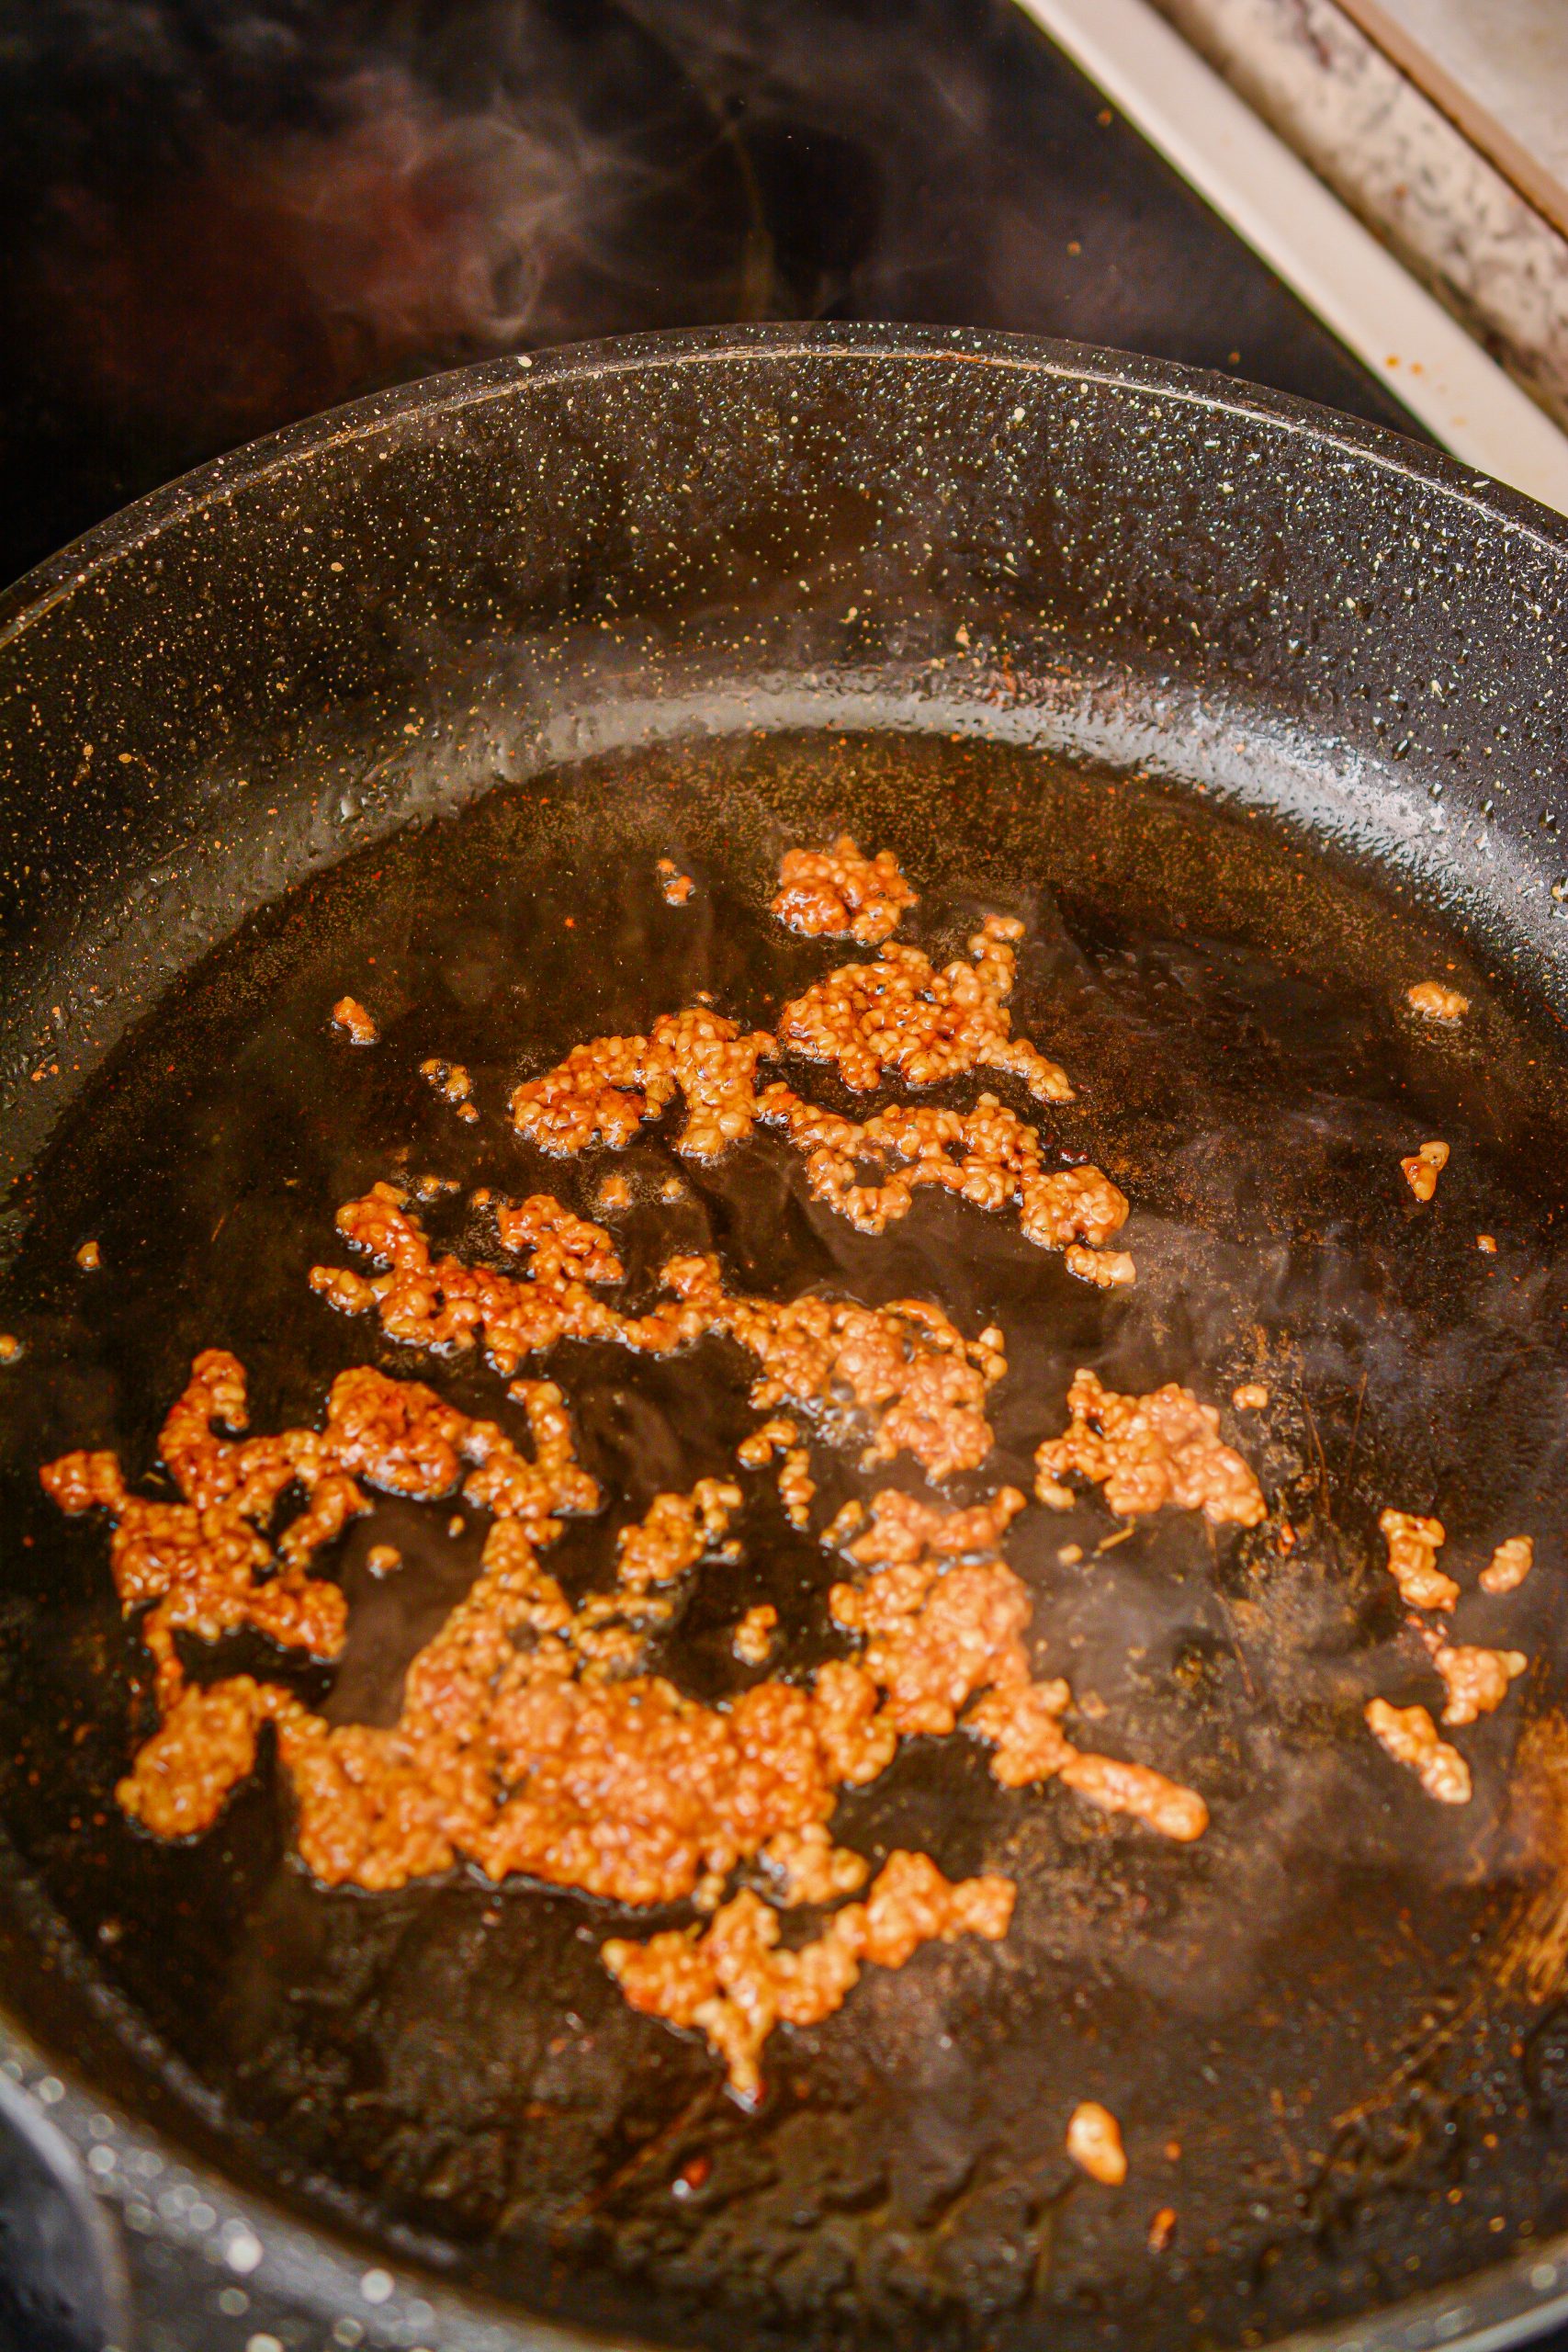 In the same skillet over medium heat, add the garlic to the remaining oil.